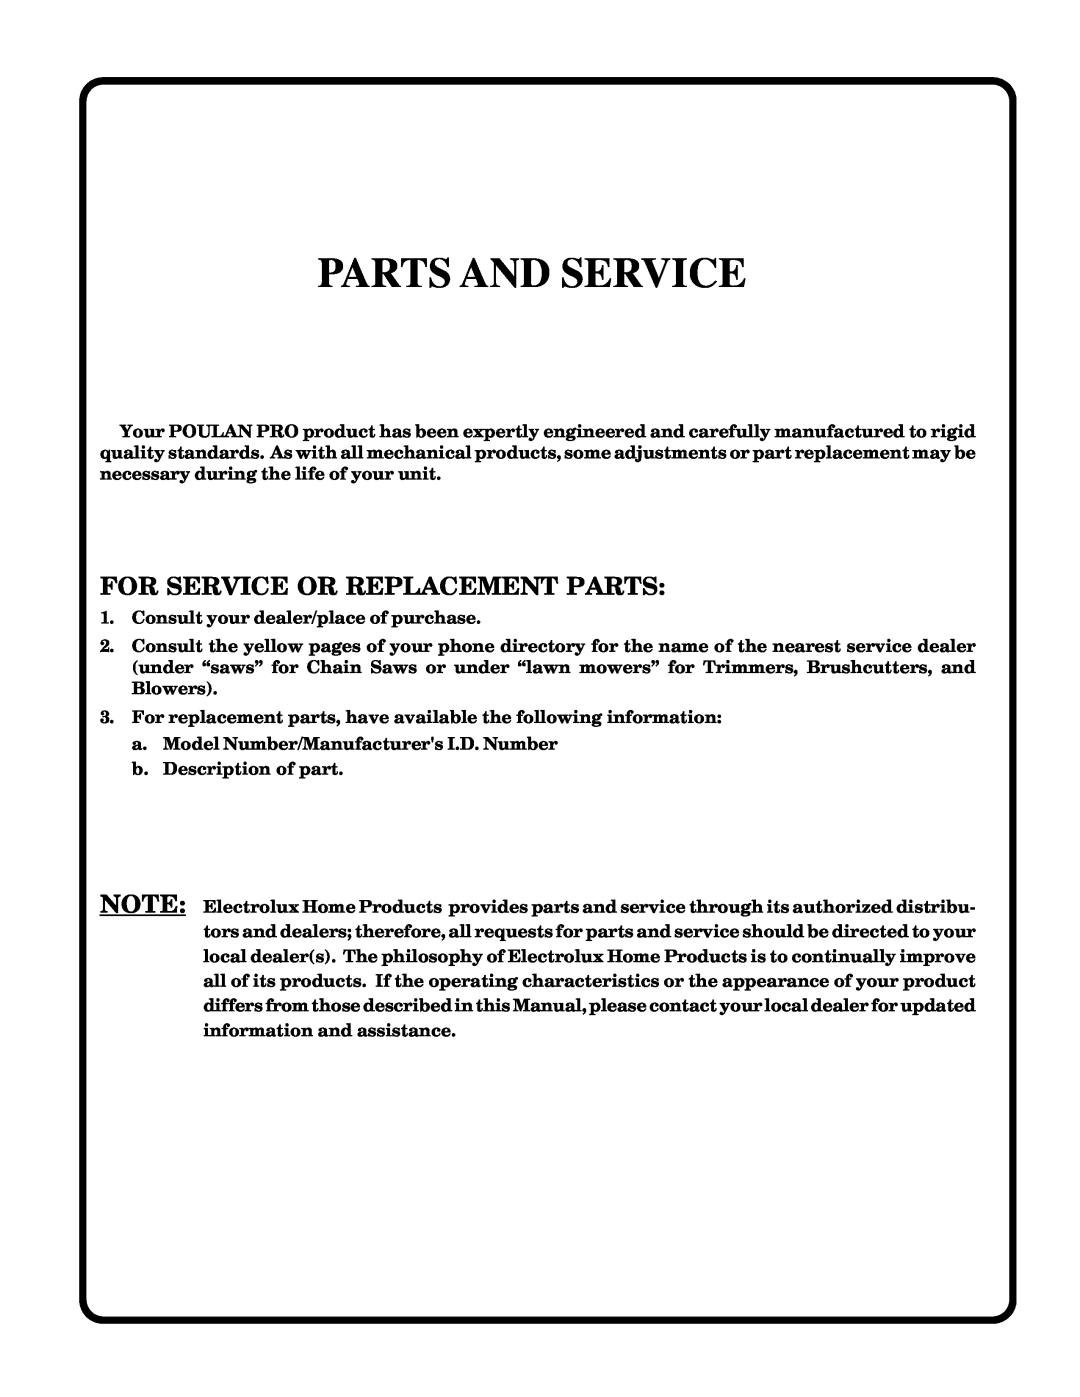 Poulan 178108 owner manual Parts And Service, For Service Or Replacement Parts 